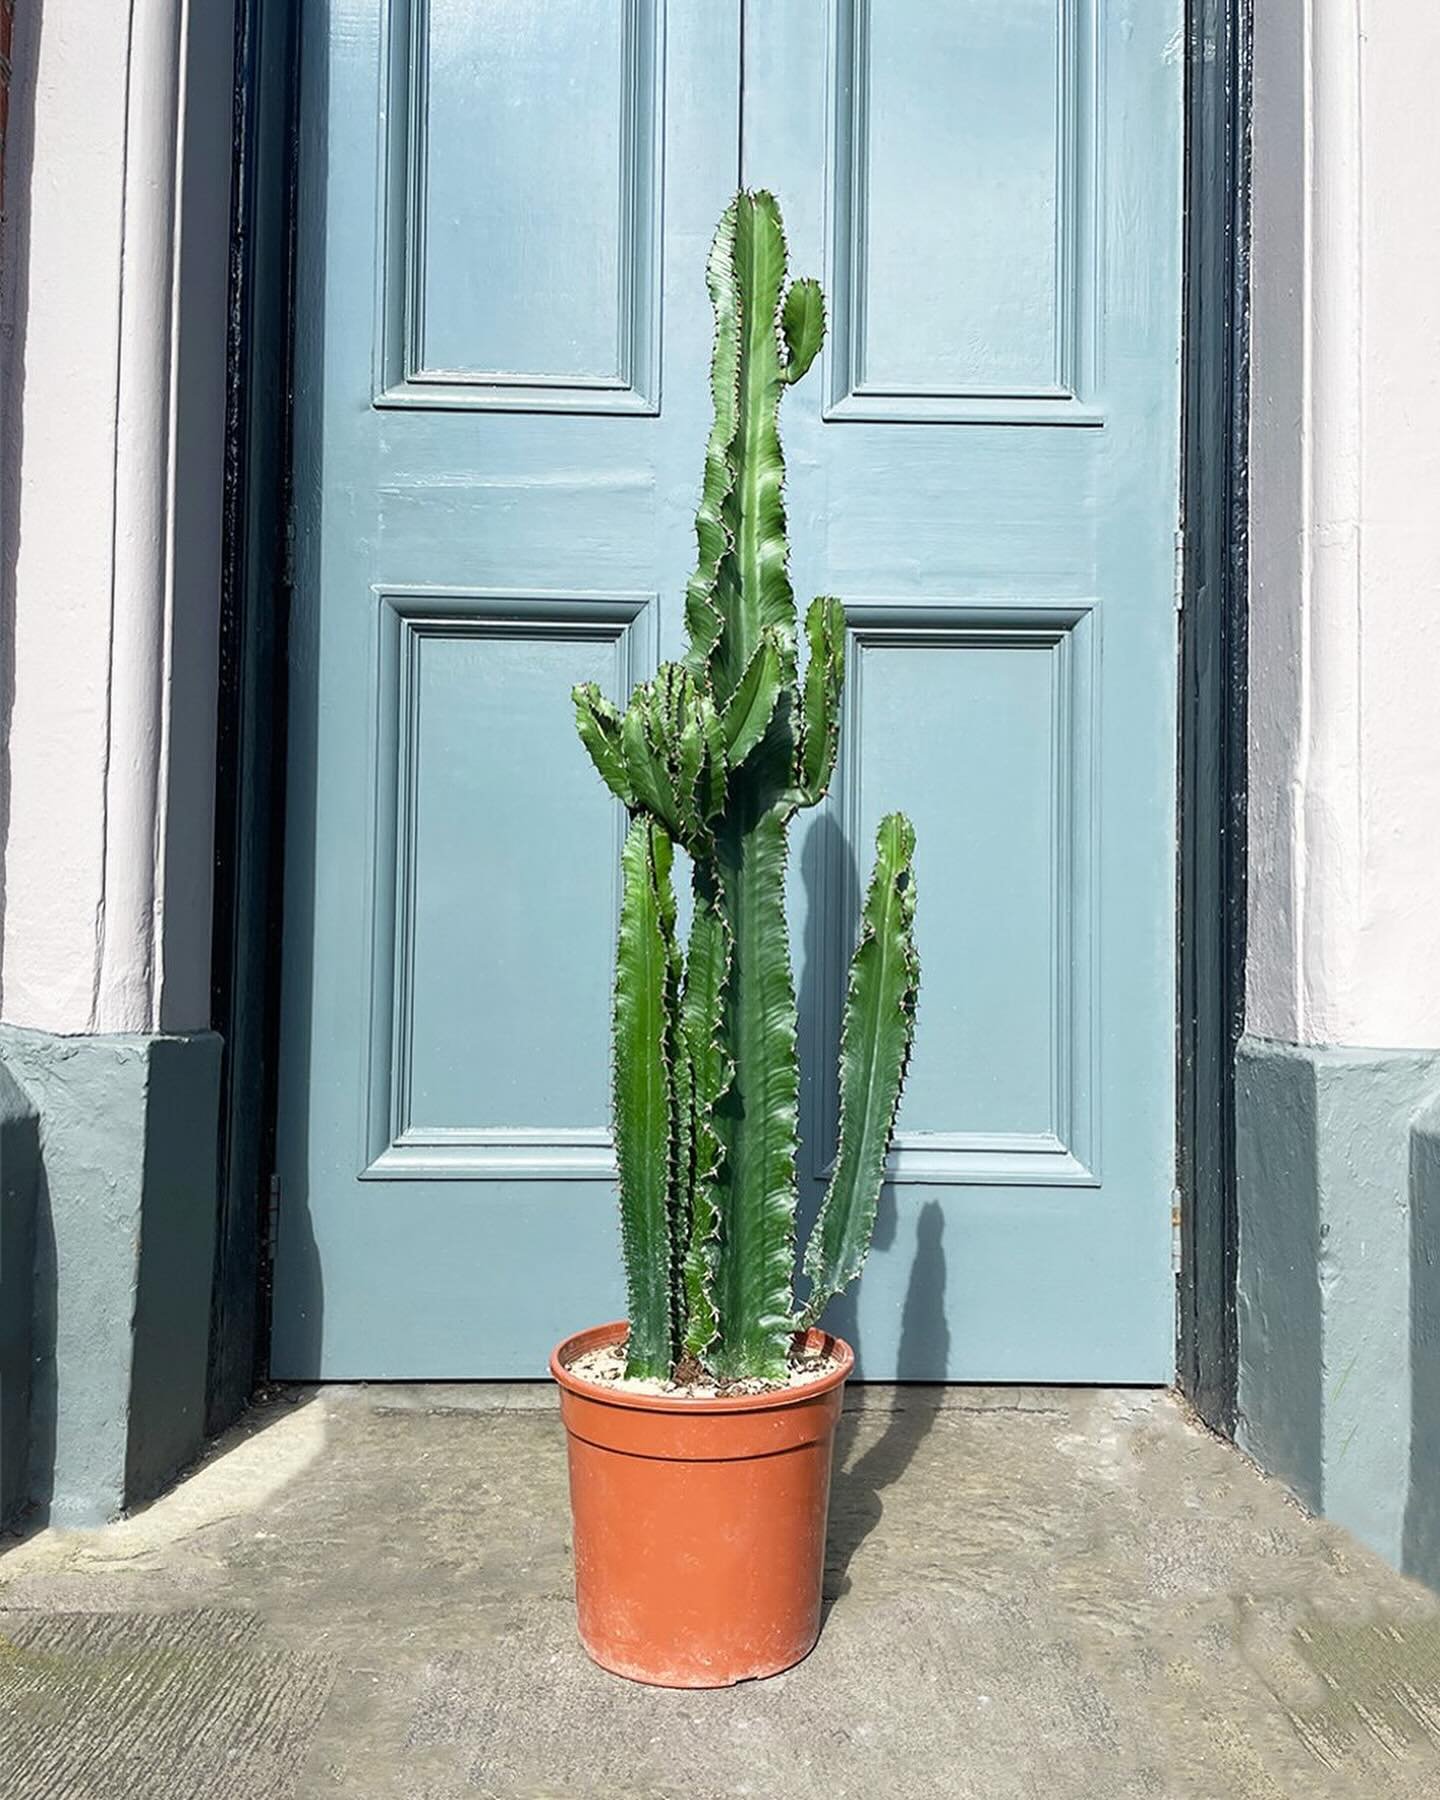 Relaxing today before we head off to @the_rhs Malvern show this coming week.

Known as the &lsquo;Desert Candle Cactus&rsquo;, this stunning cactus-esque succulent has fleshy, thorned stems. Mature specimens can grow to up to a massive 18m tall in th